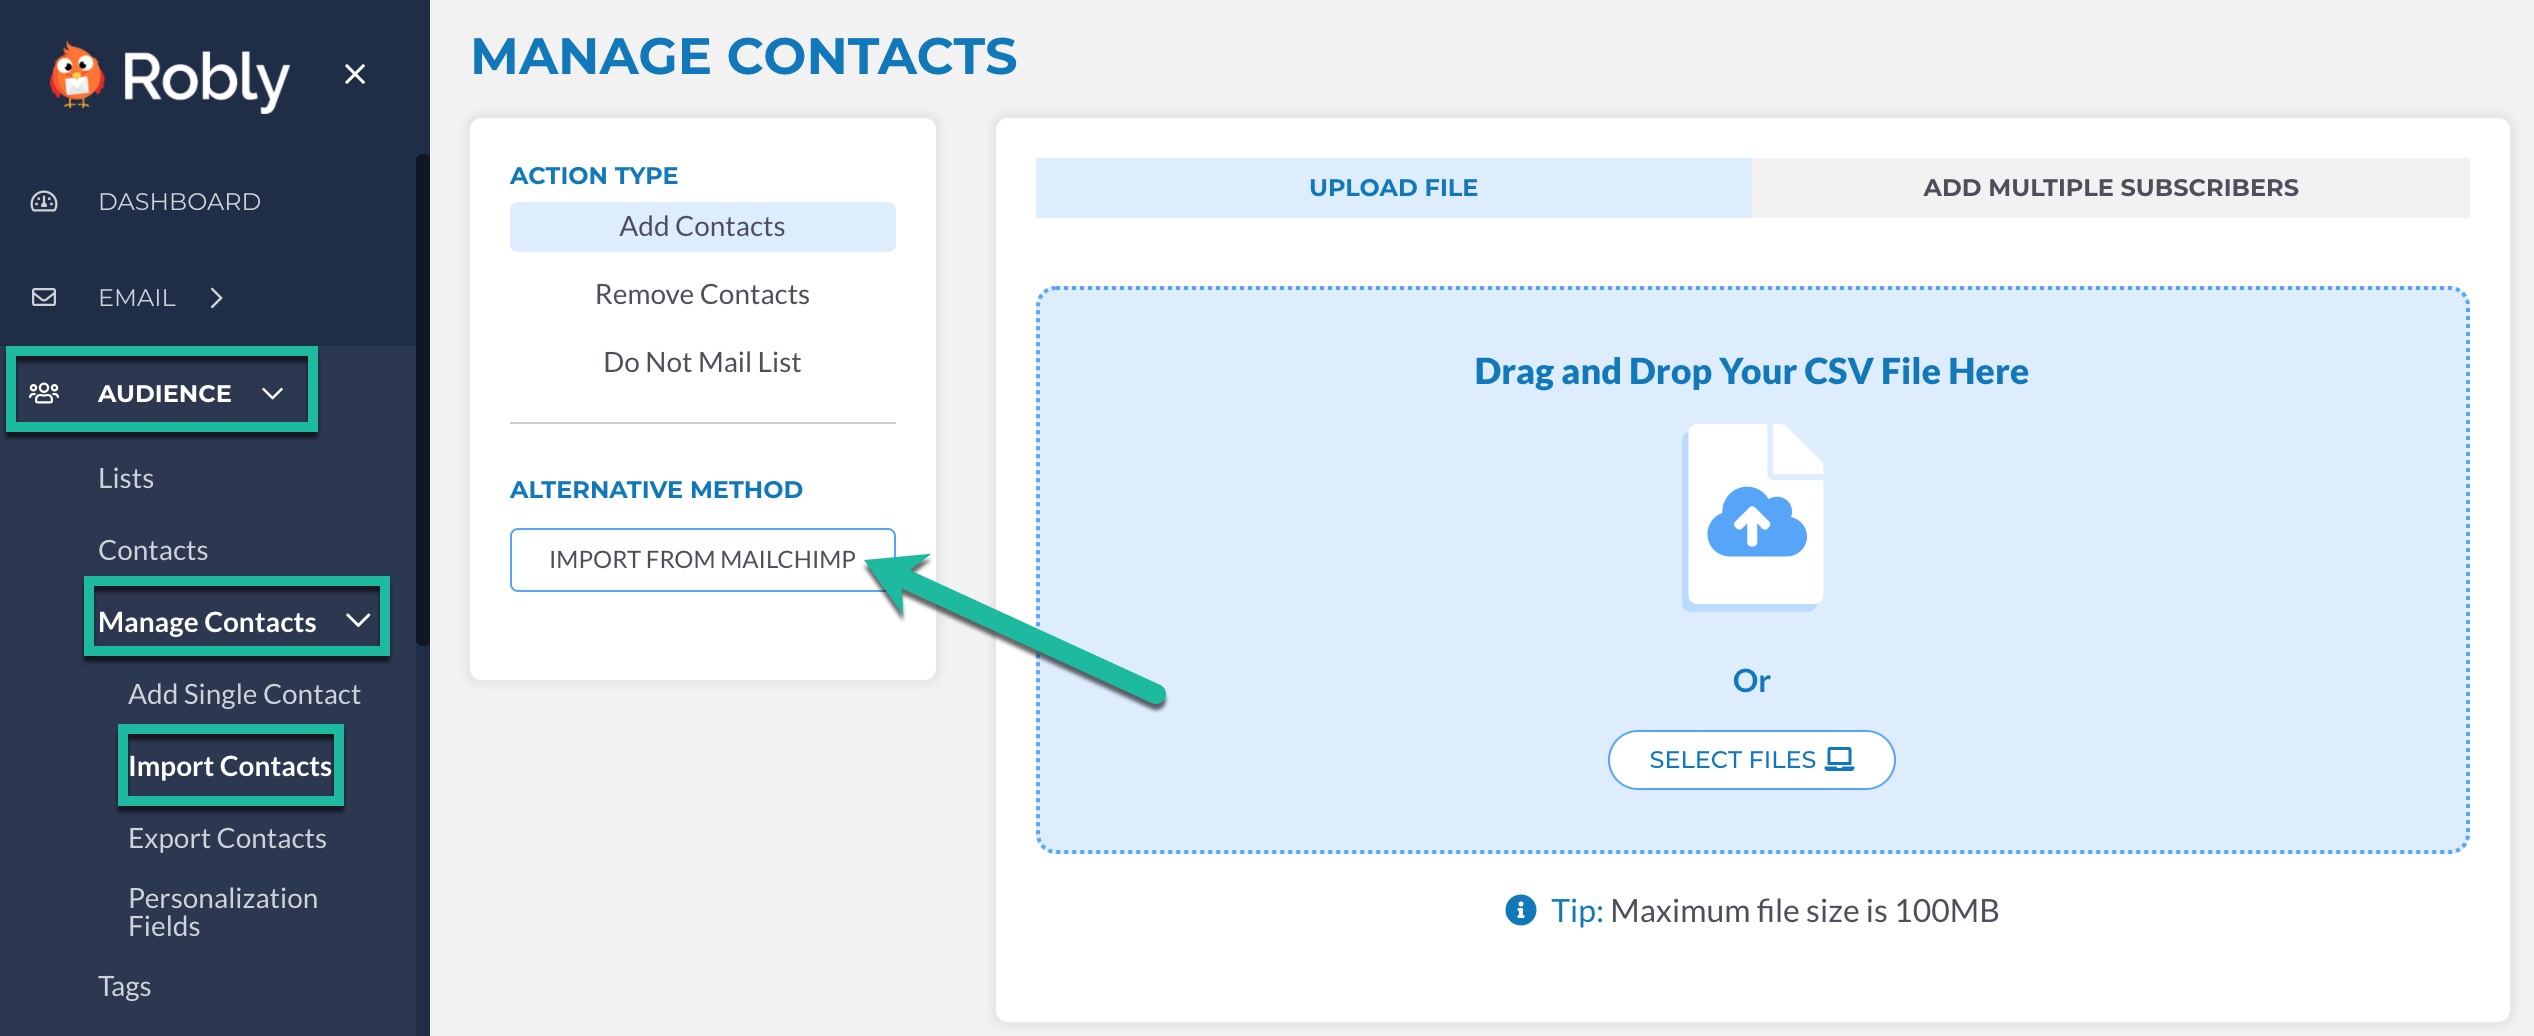 How do I import contacts from Mailchimp? –